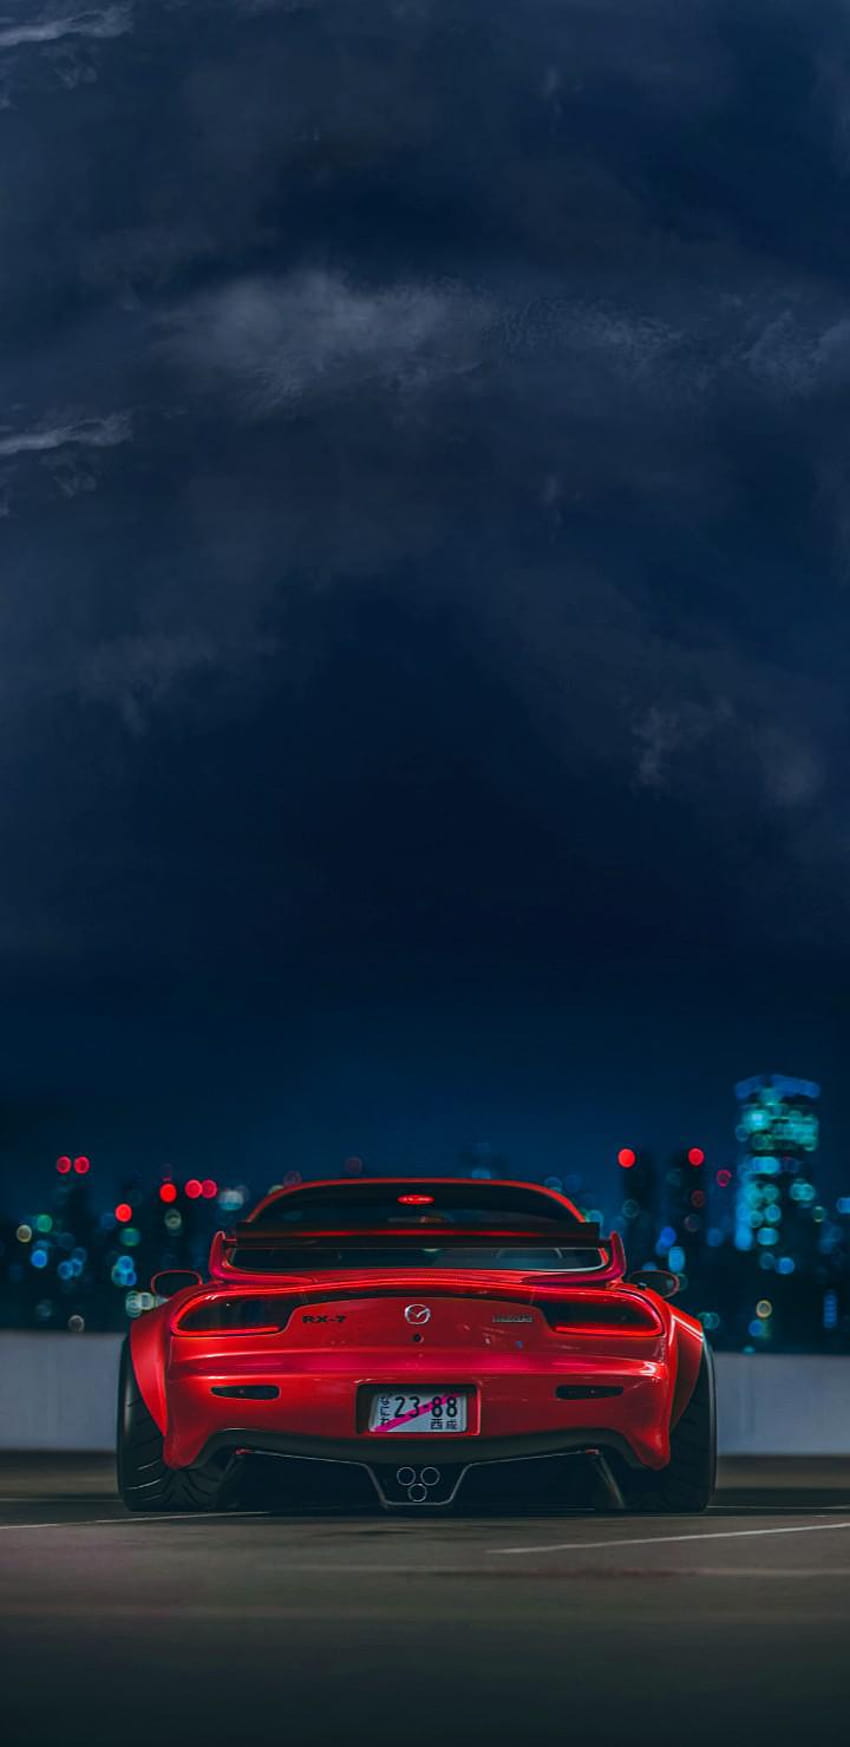 RX7 FD i edited from another and i thought I'd share it to the sub,hope u guys like✌: RX7, rx7 iphone HD phone wallpaper